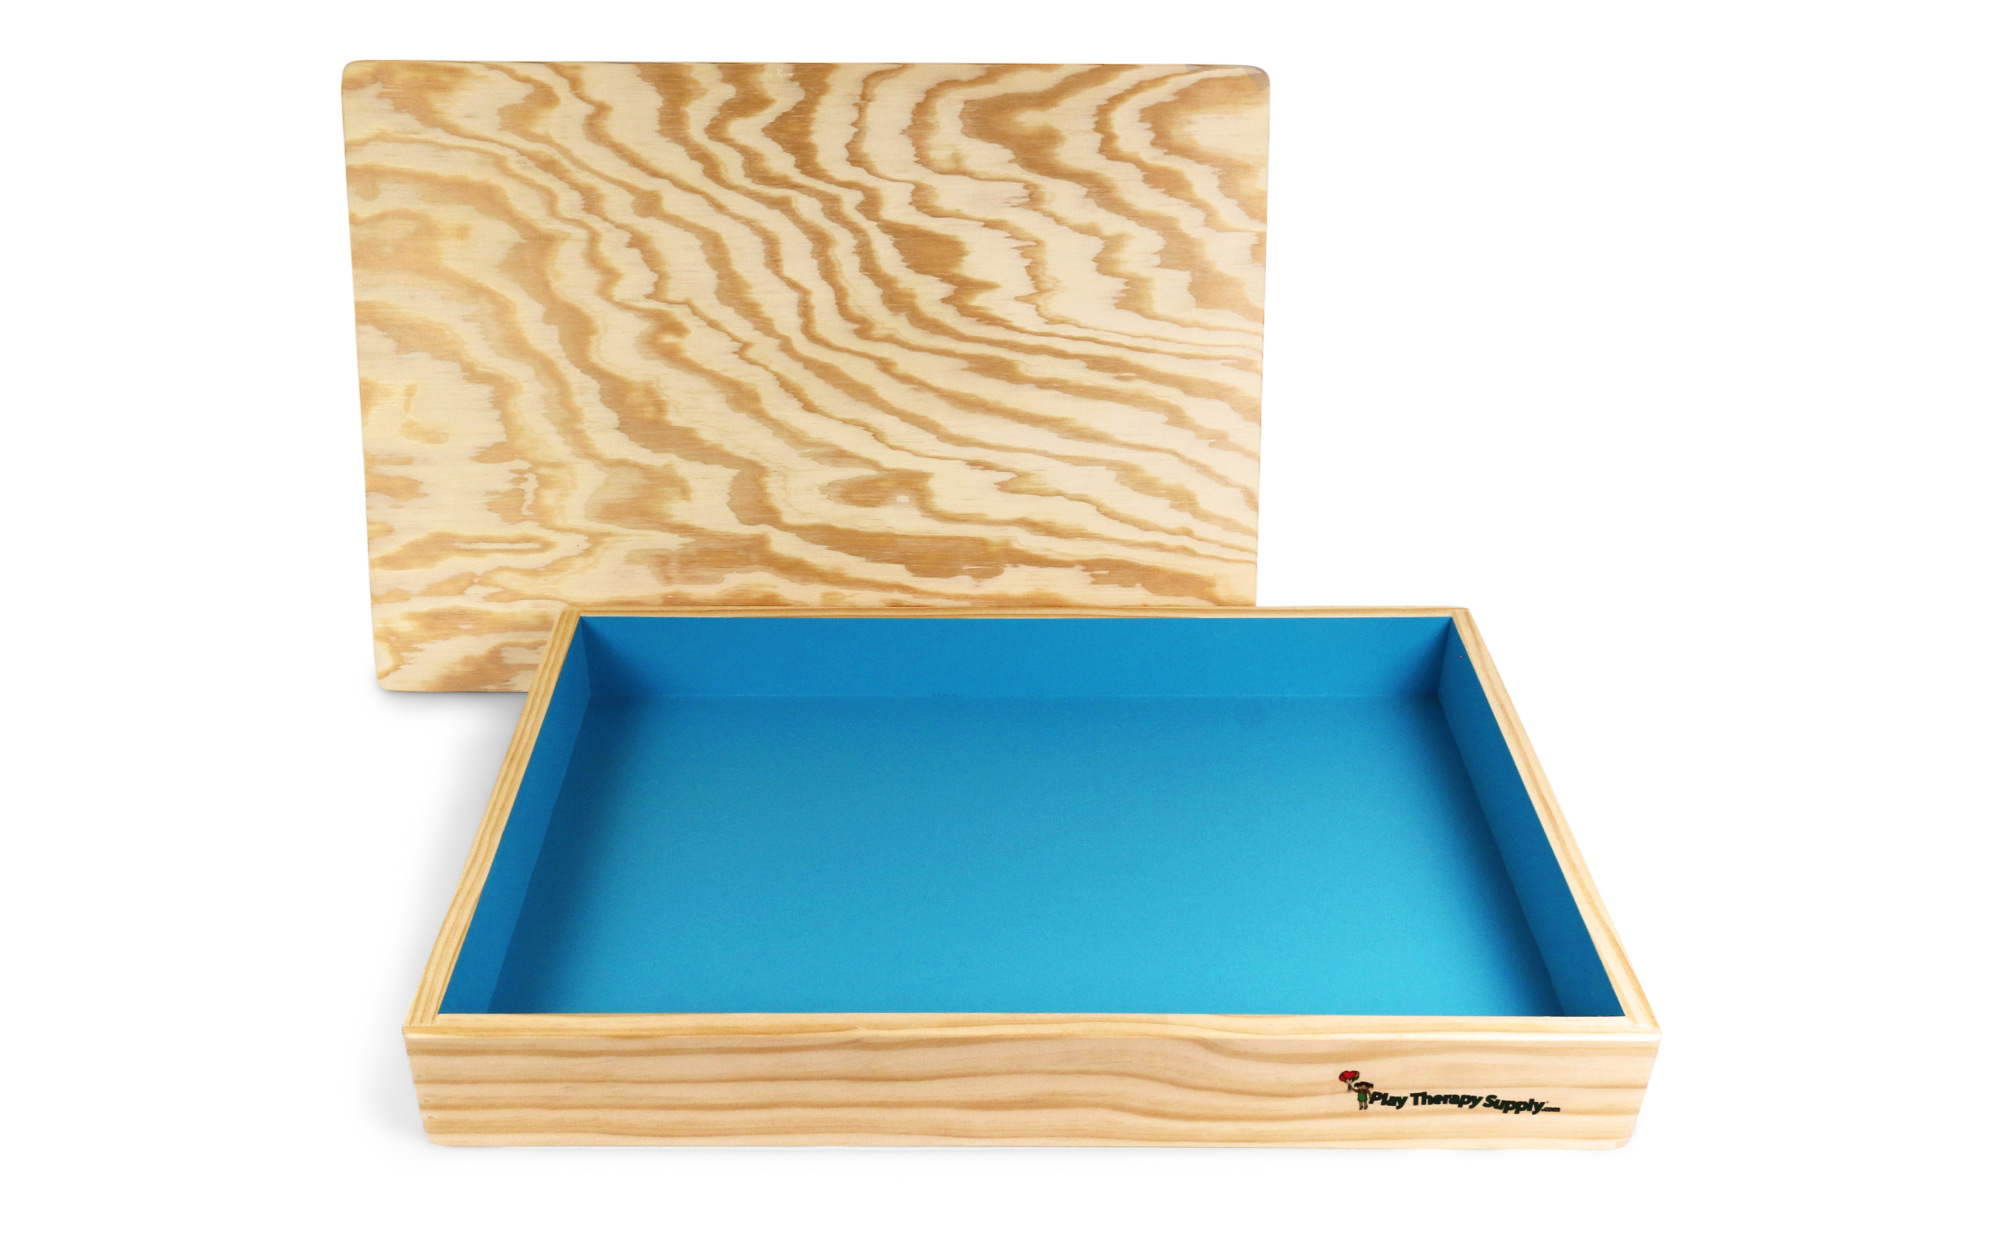 Basic Wooden Sand Tray with Lid – Sand Tray Therapy